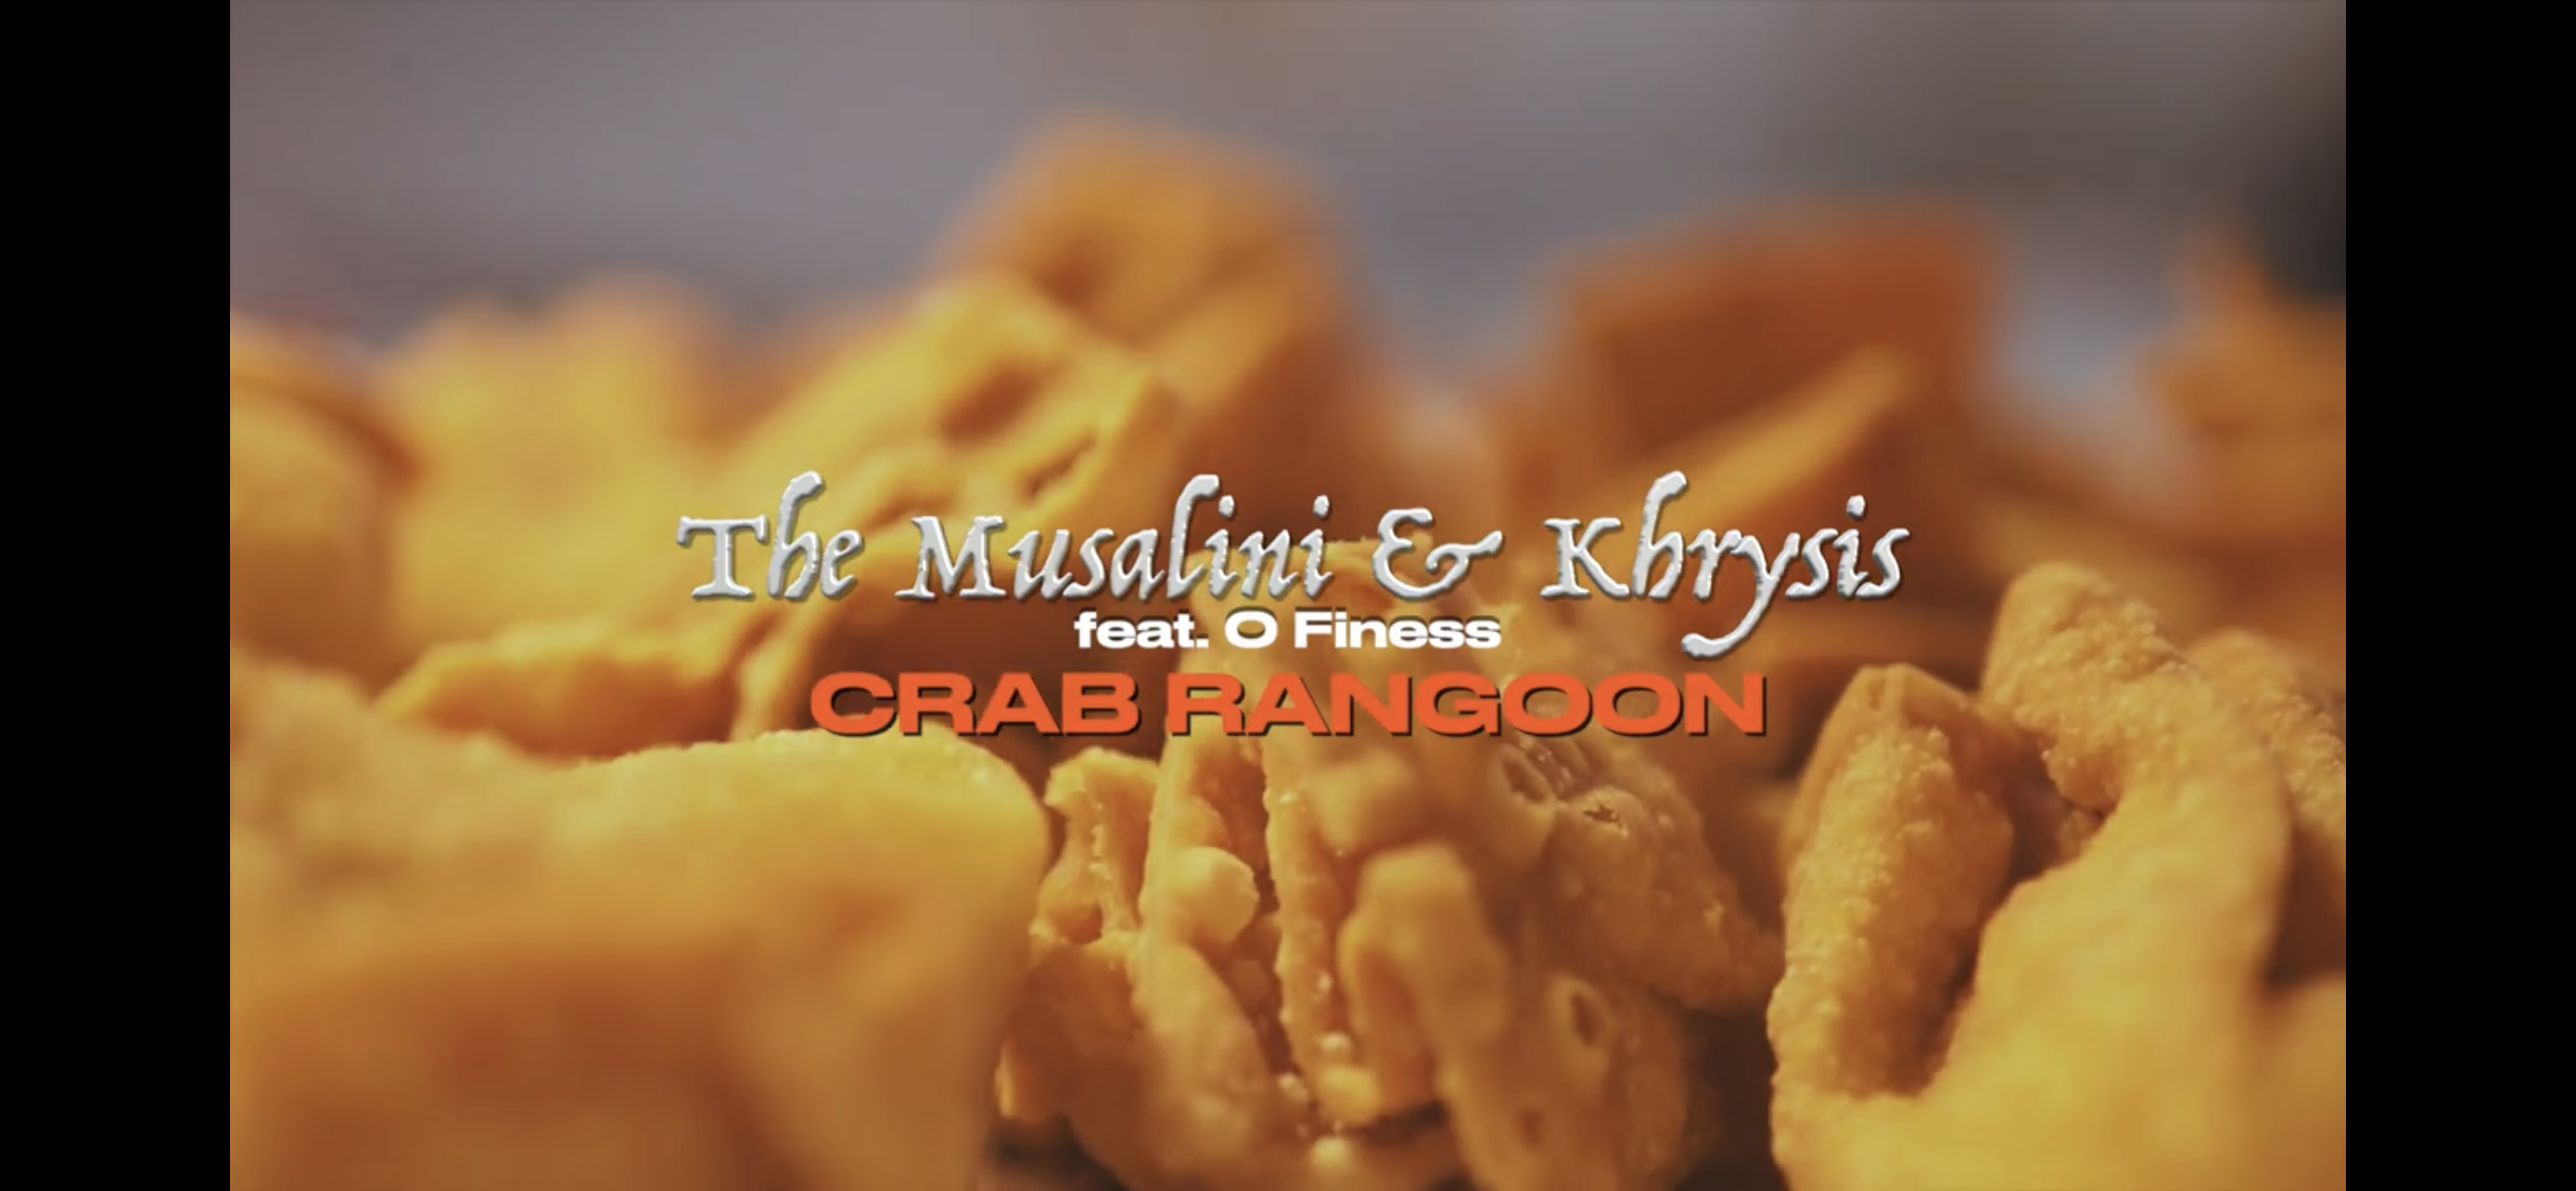 The Musalini & Khrysis - Crab Rangoon (Official Music Video) feat. O-Finesse